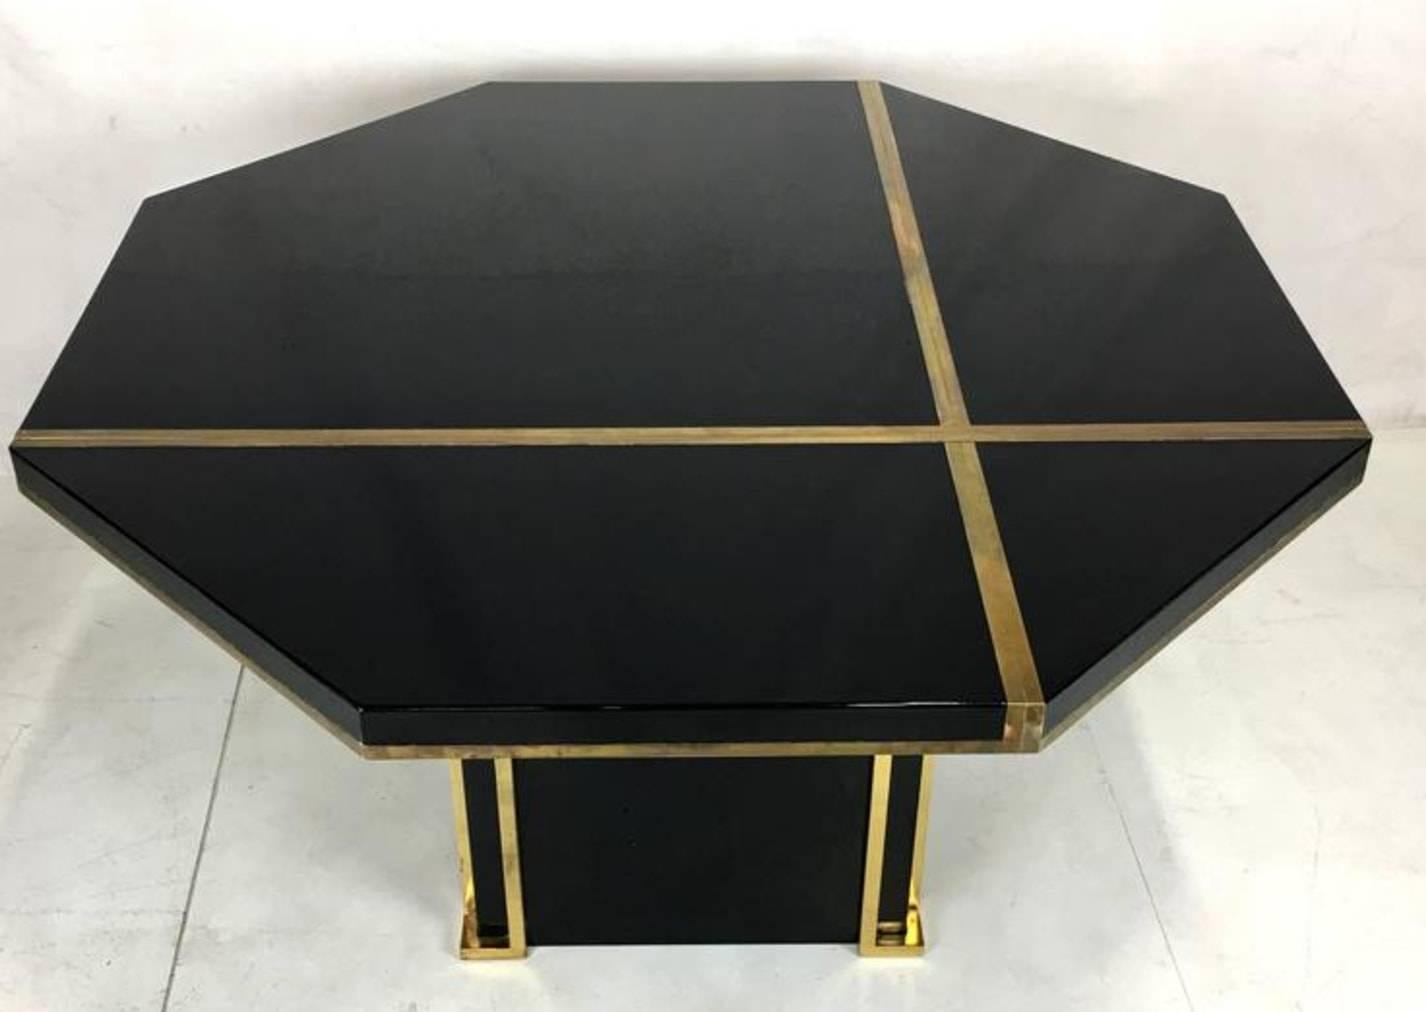 An impressive display of elegance, this dining table is stunning in either modern or classic decor and a great addition to any dining room decoration. Designed by JC Mahey for Roche Bobois in the 1970s, the tabletop can be extended.